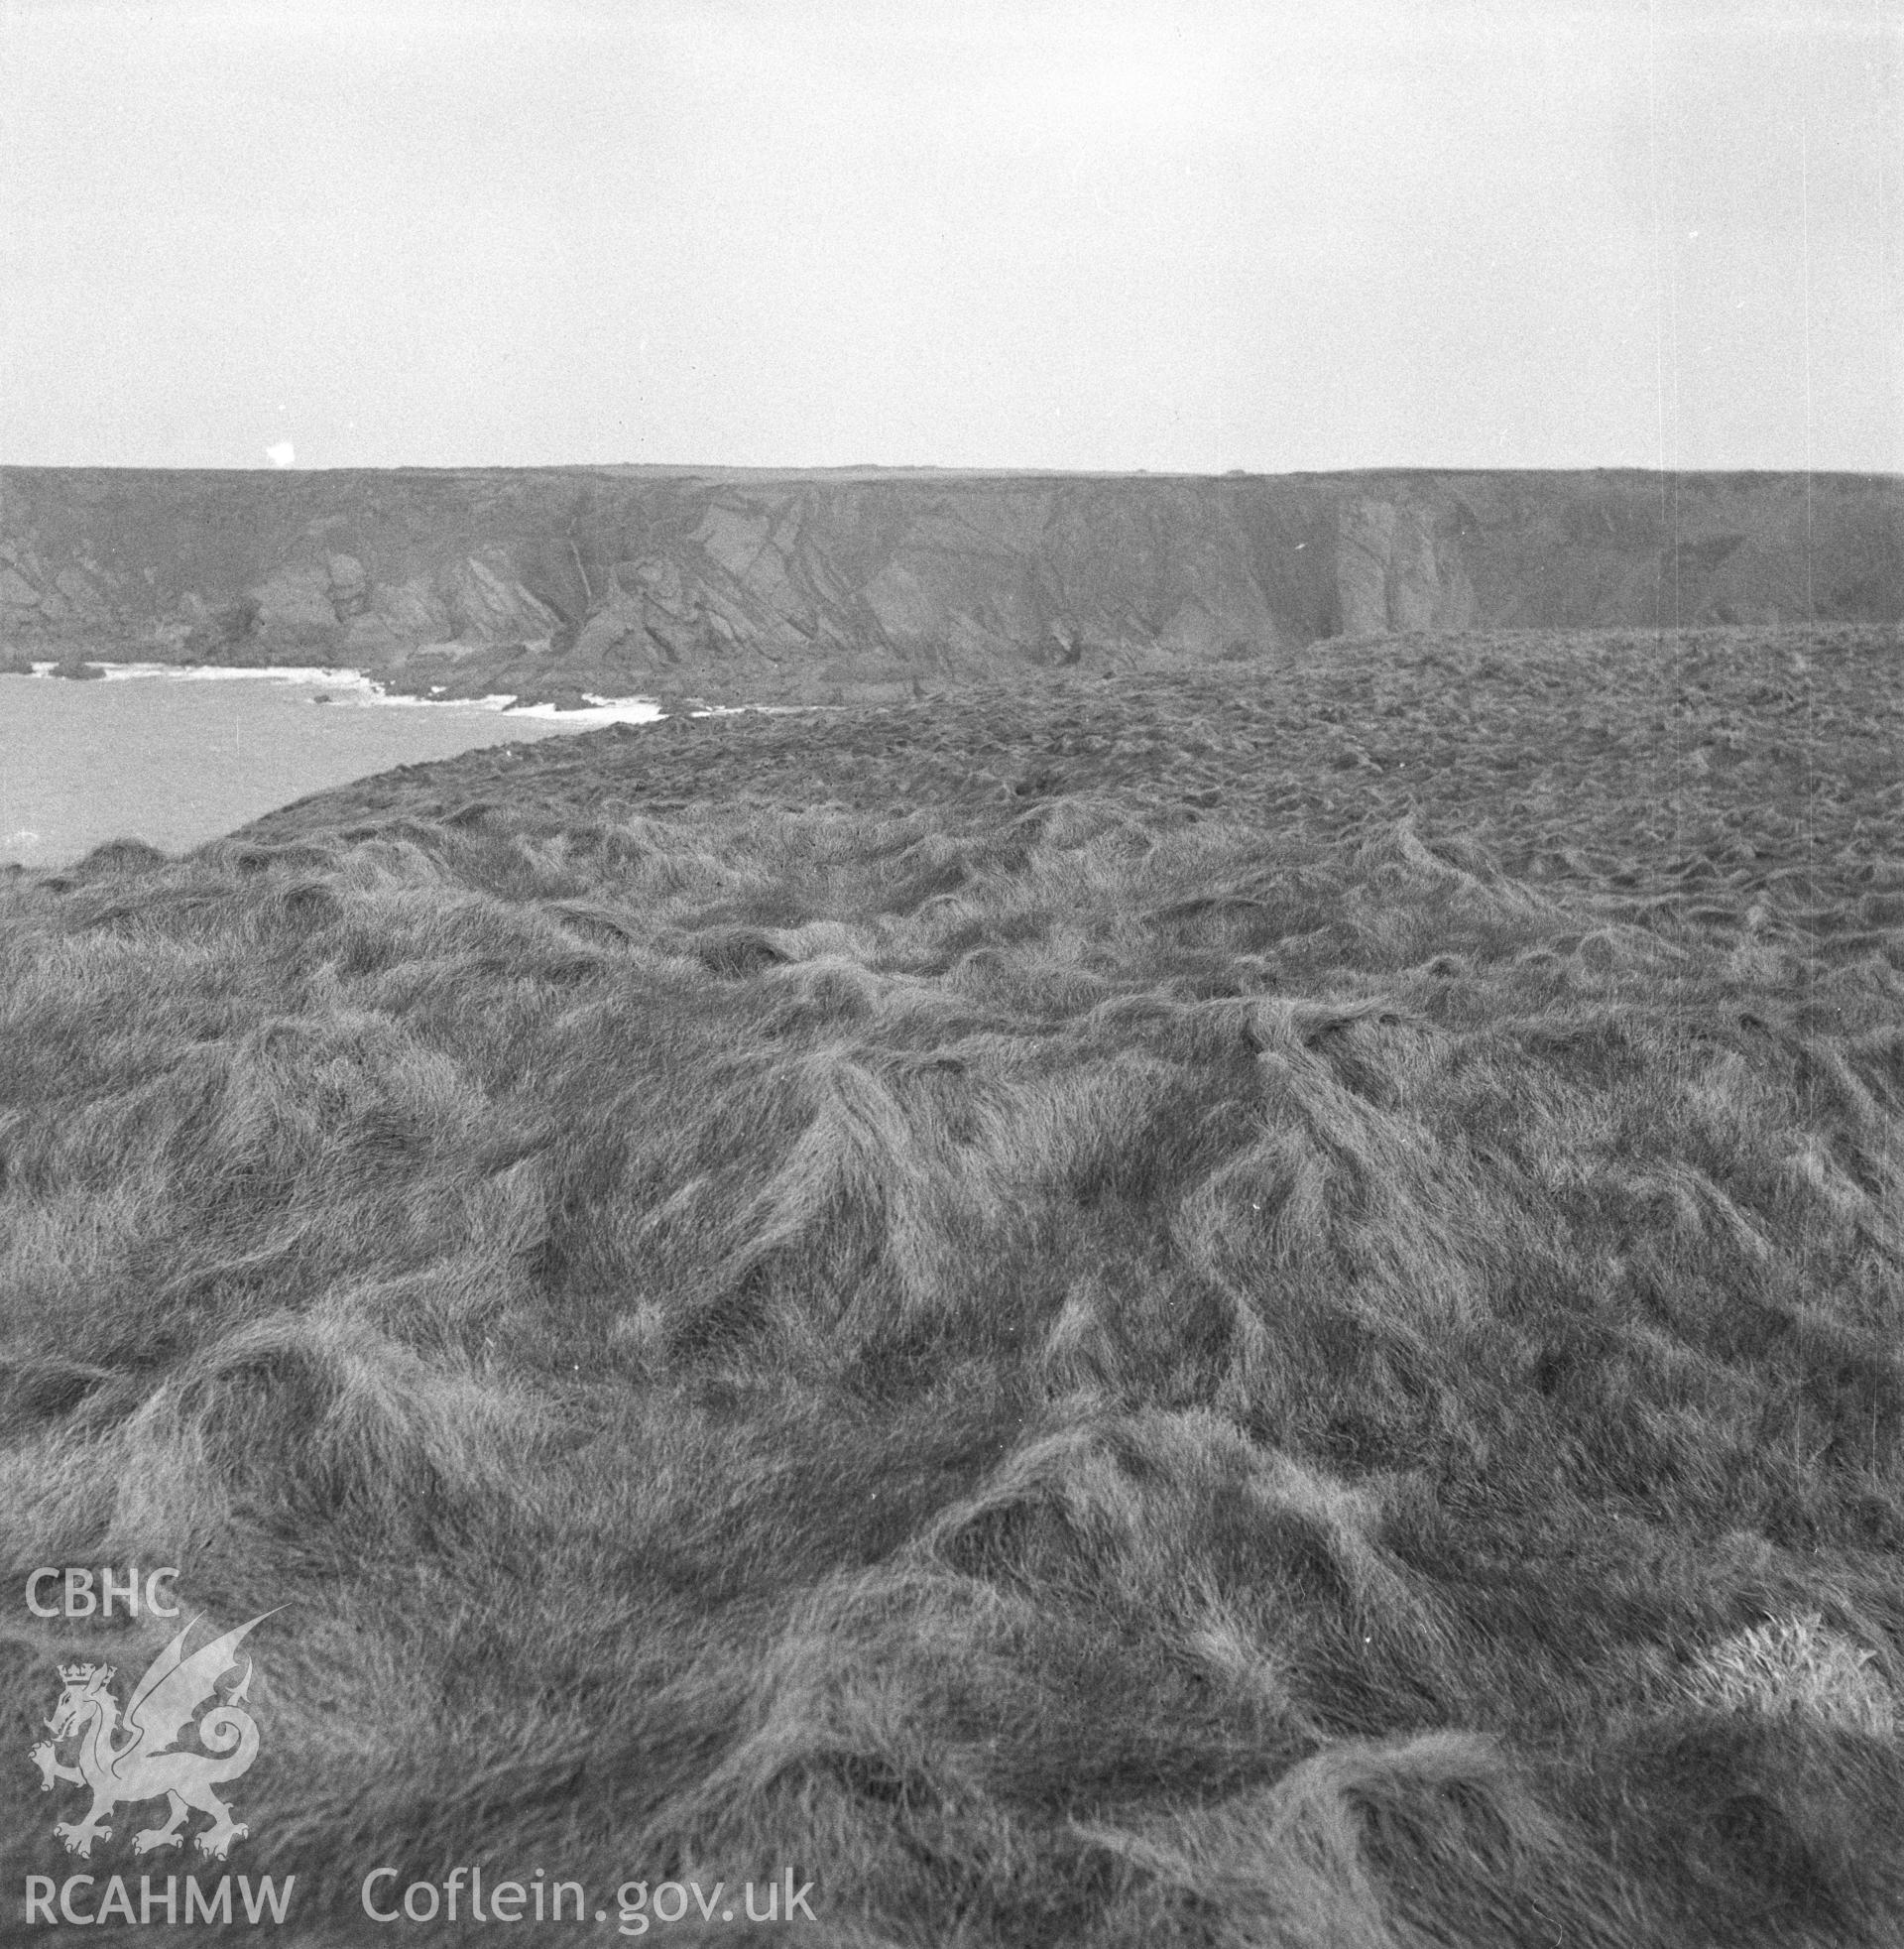 Digital copy of an acetate negative showing "Marloes, Gateholm Island", 15th April 1957.